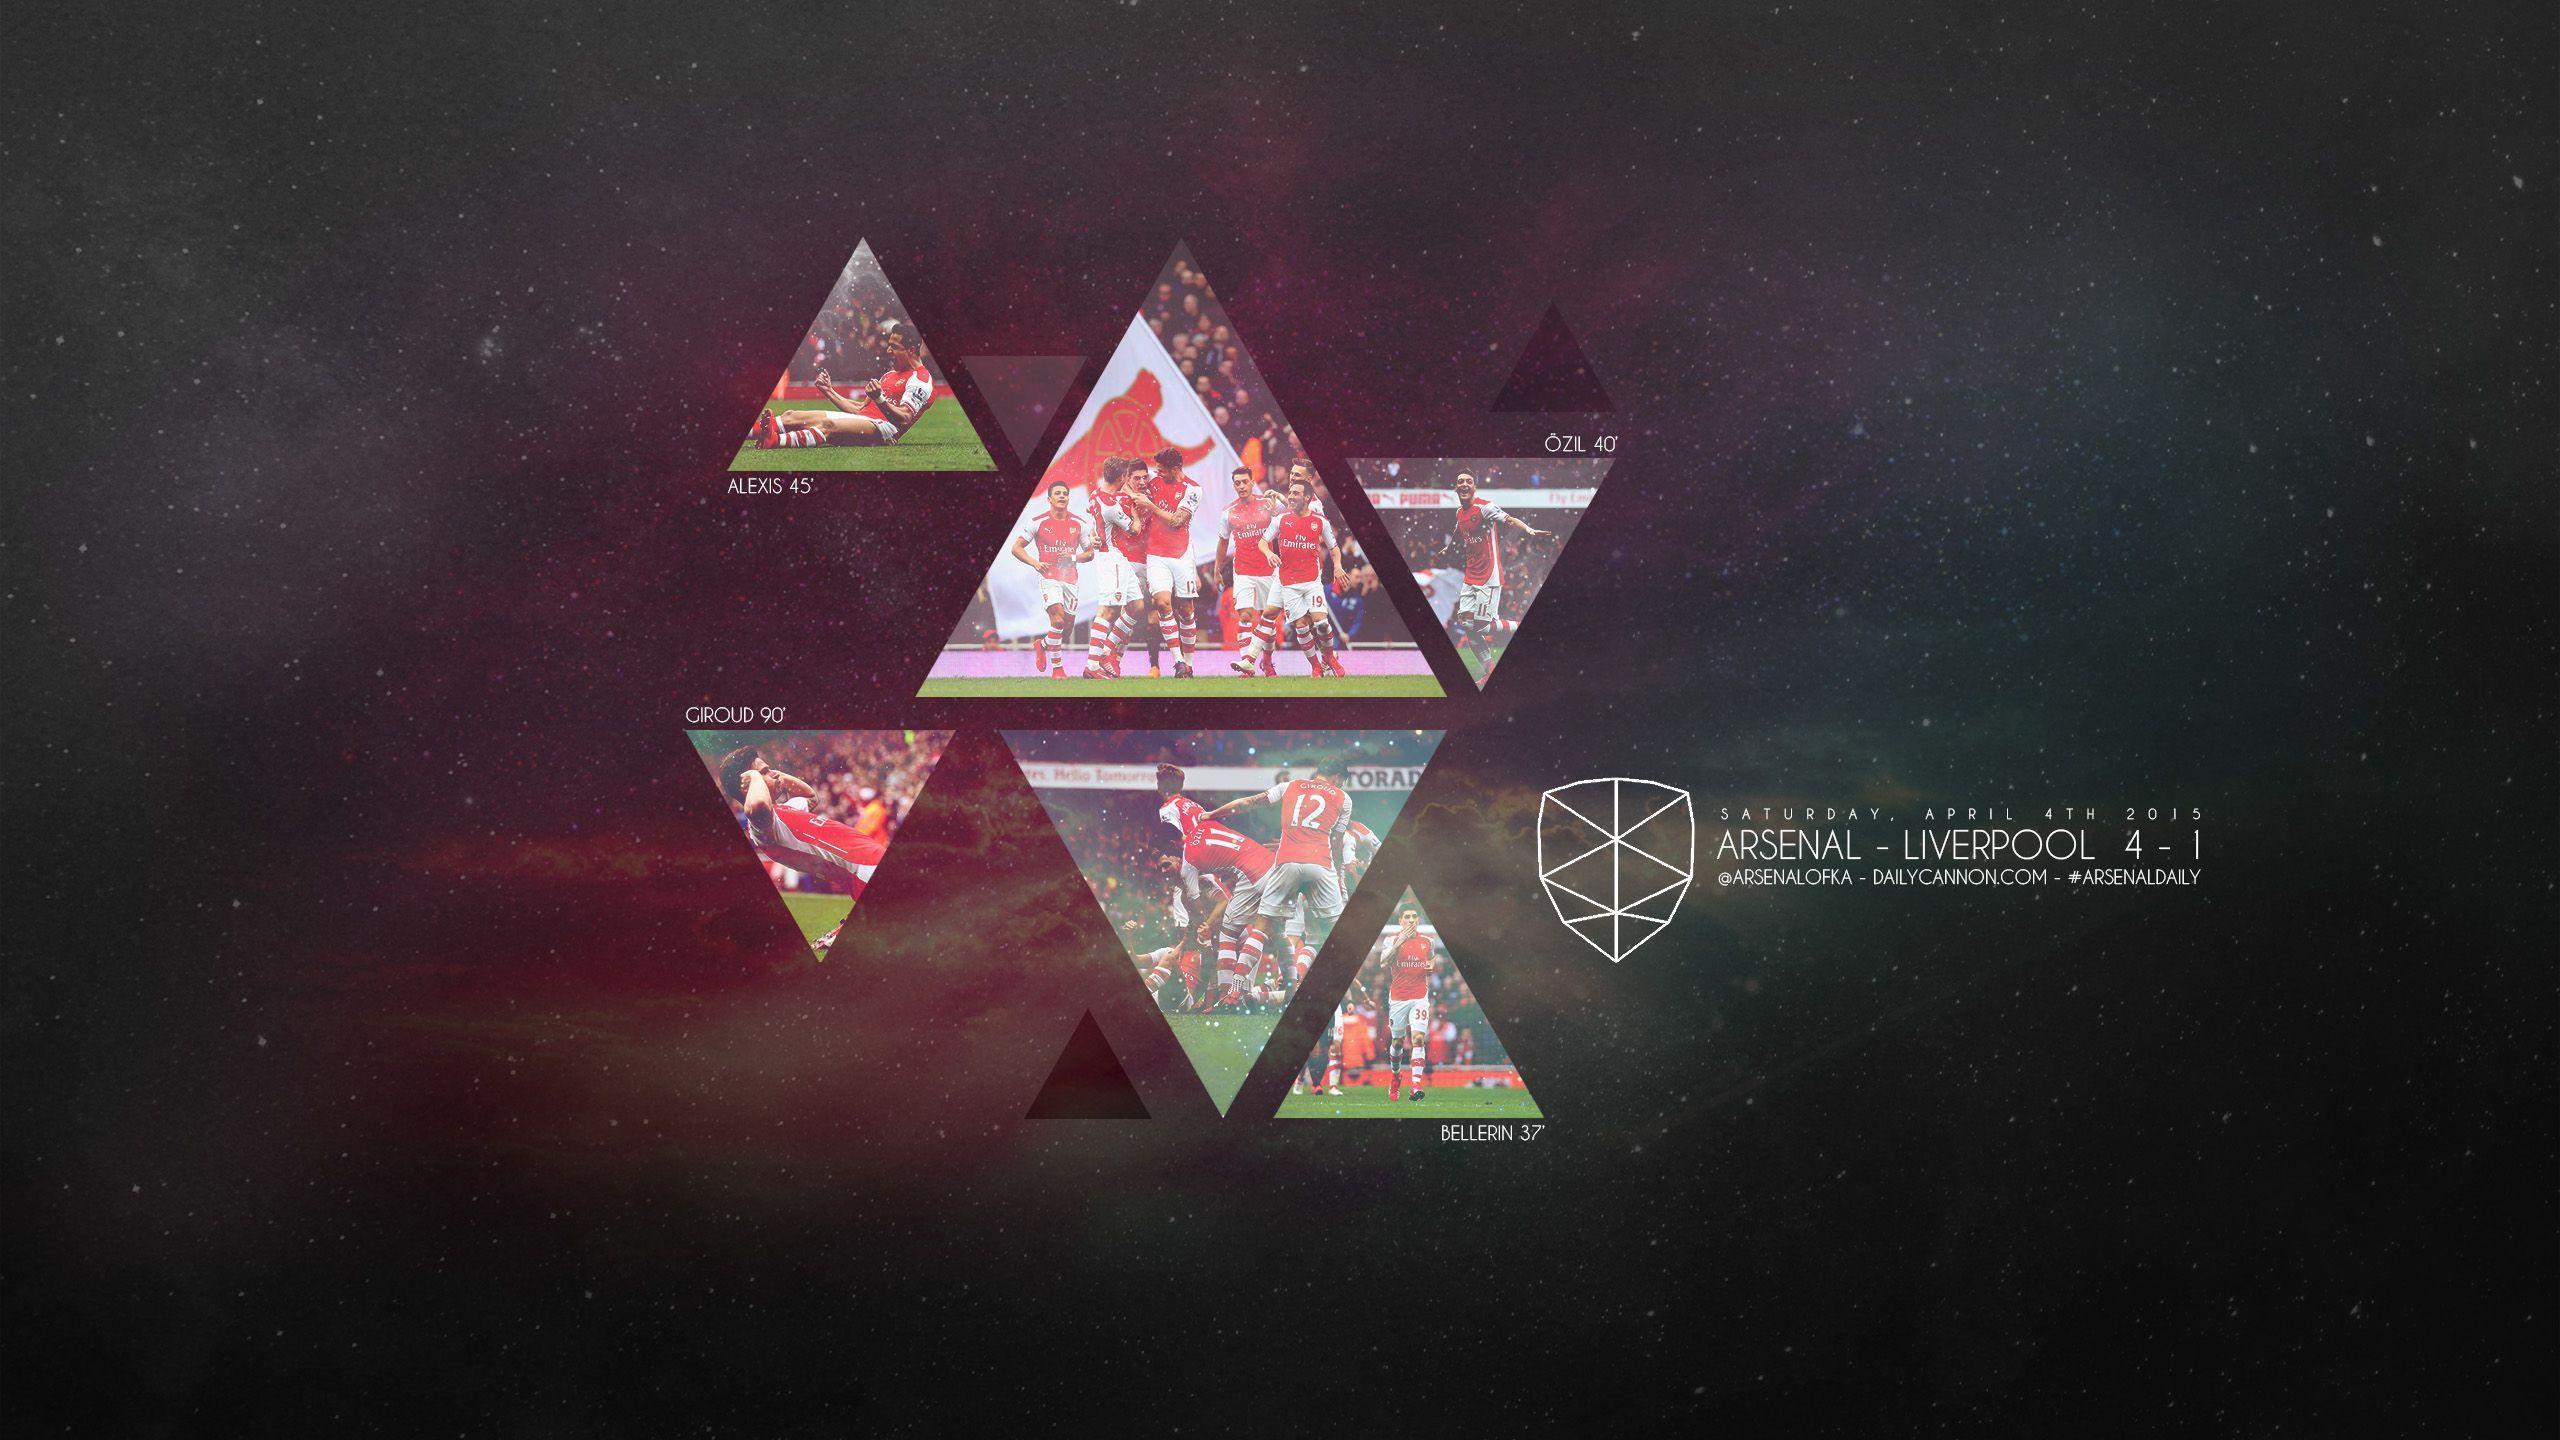 Arsenal smash Liverpool: Wallpaper, headers and covers